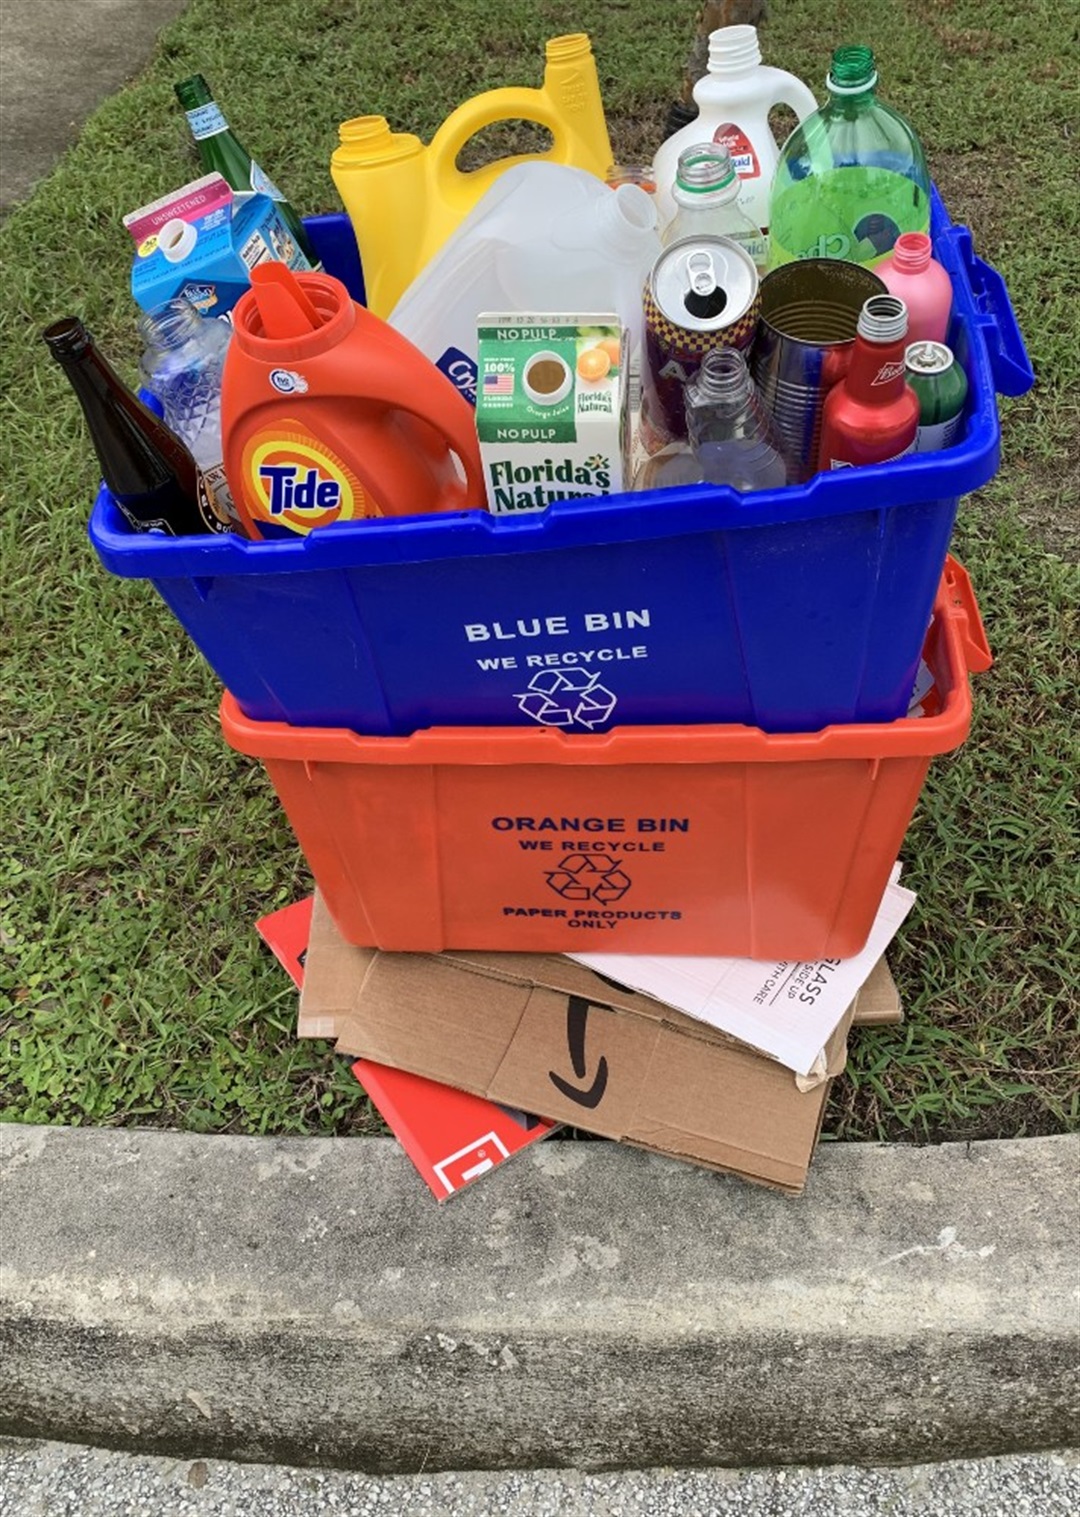 https://www.gainesvillefl.gov/files/assets/public/v/1/recycling/images/both-bins-curbside-with-boxes-under_712x1000.jpg?w=1080